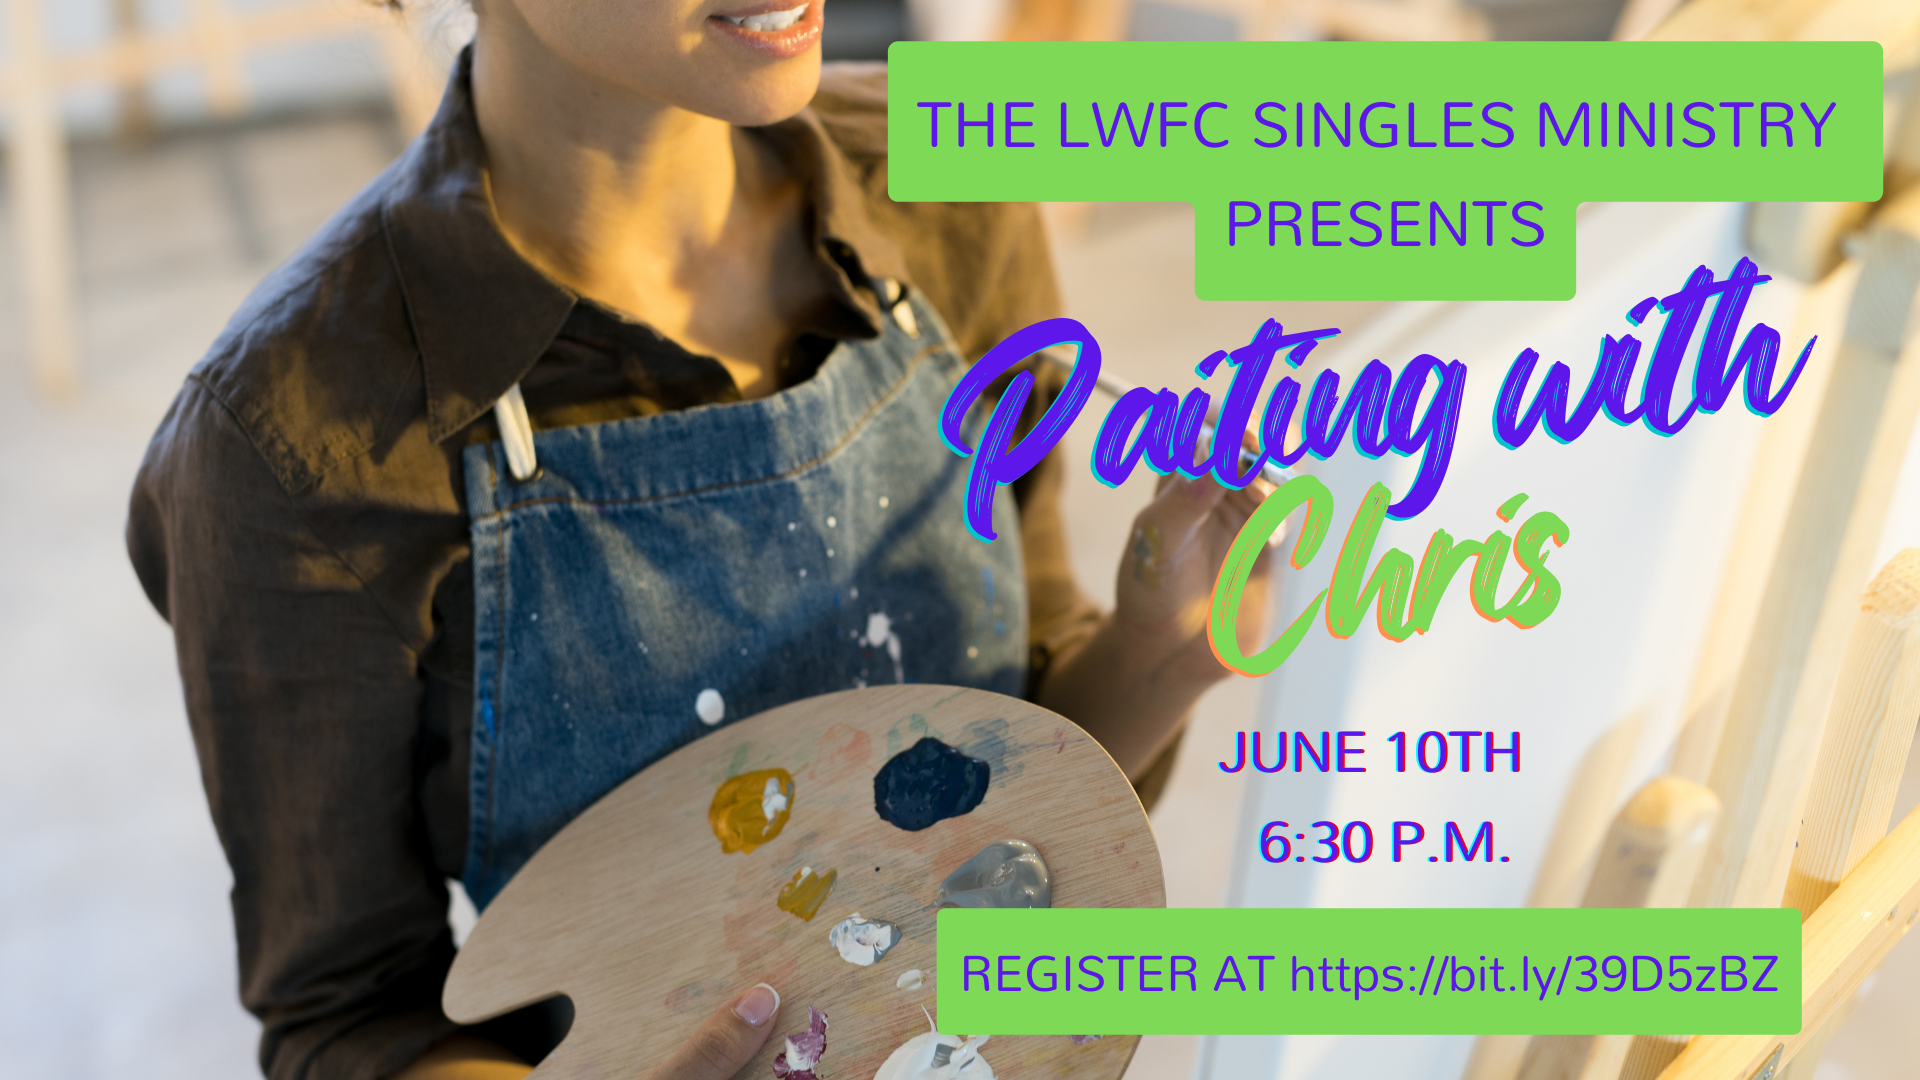 SINGLES MINISTRY PAINTING WITH CHRIS – June 10th 6:30 p.m. head image